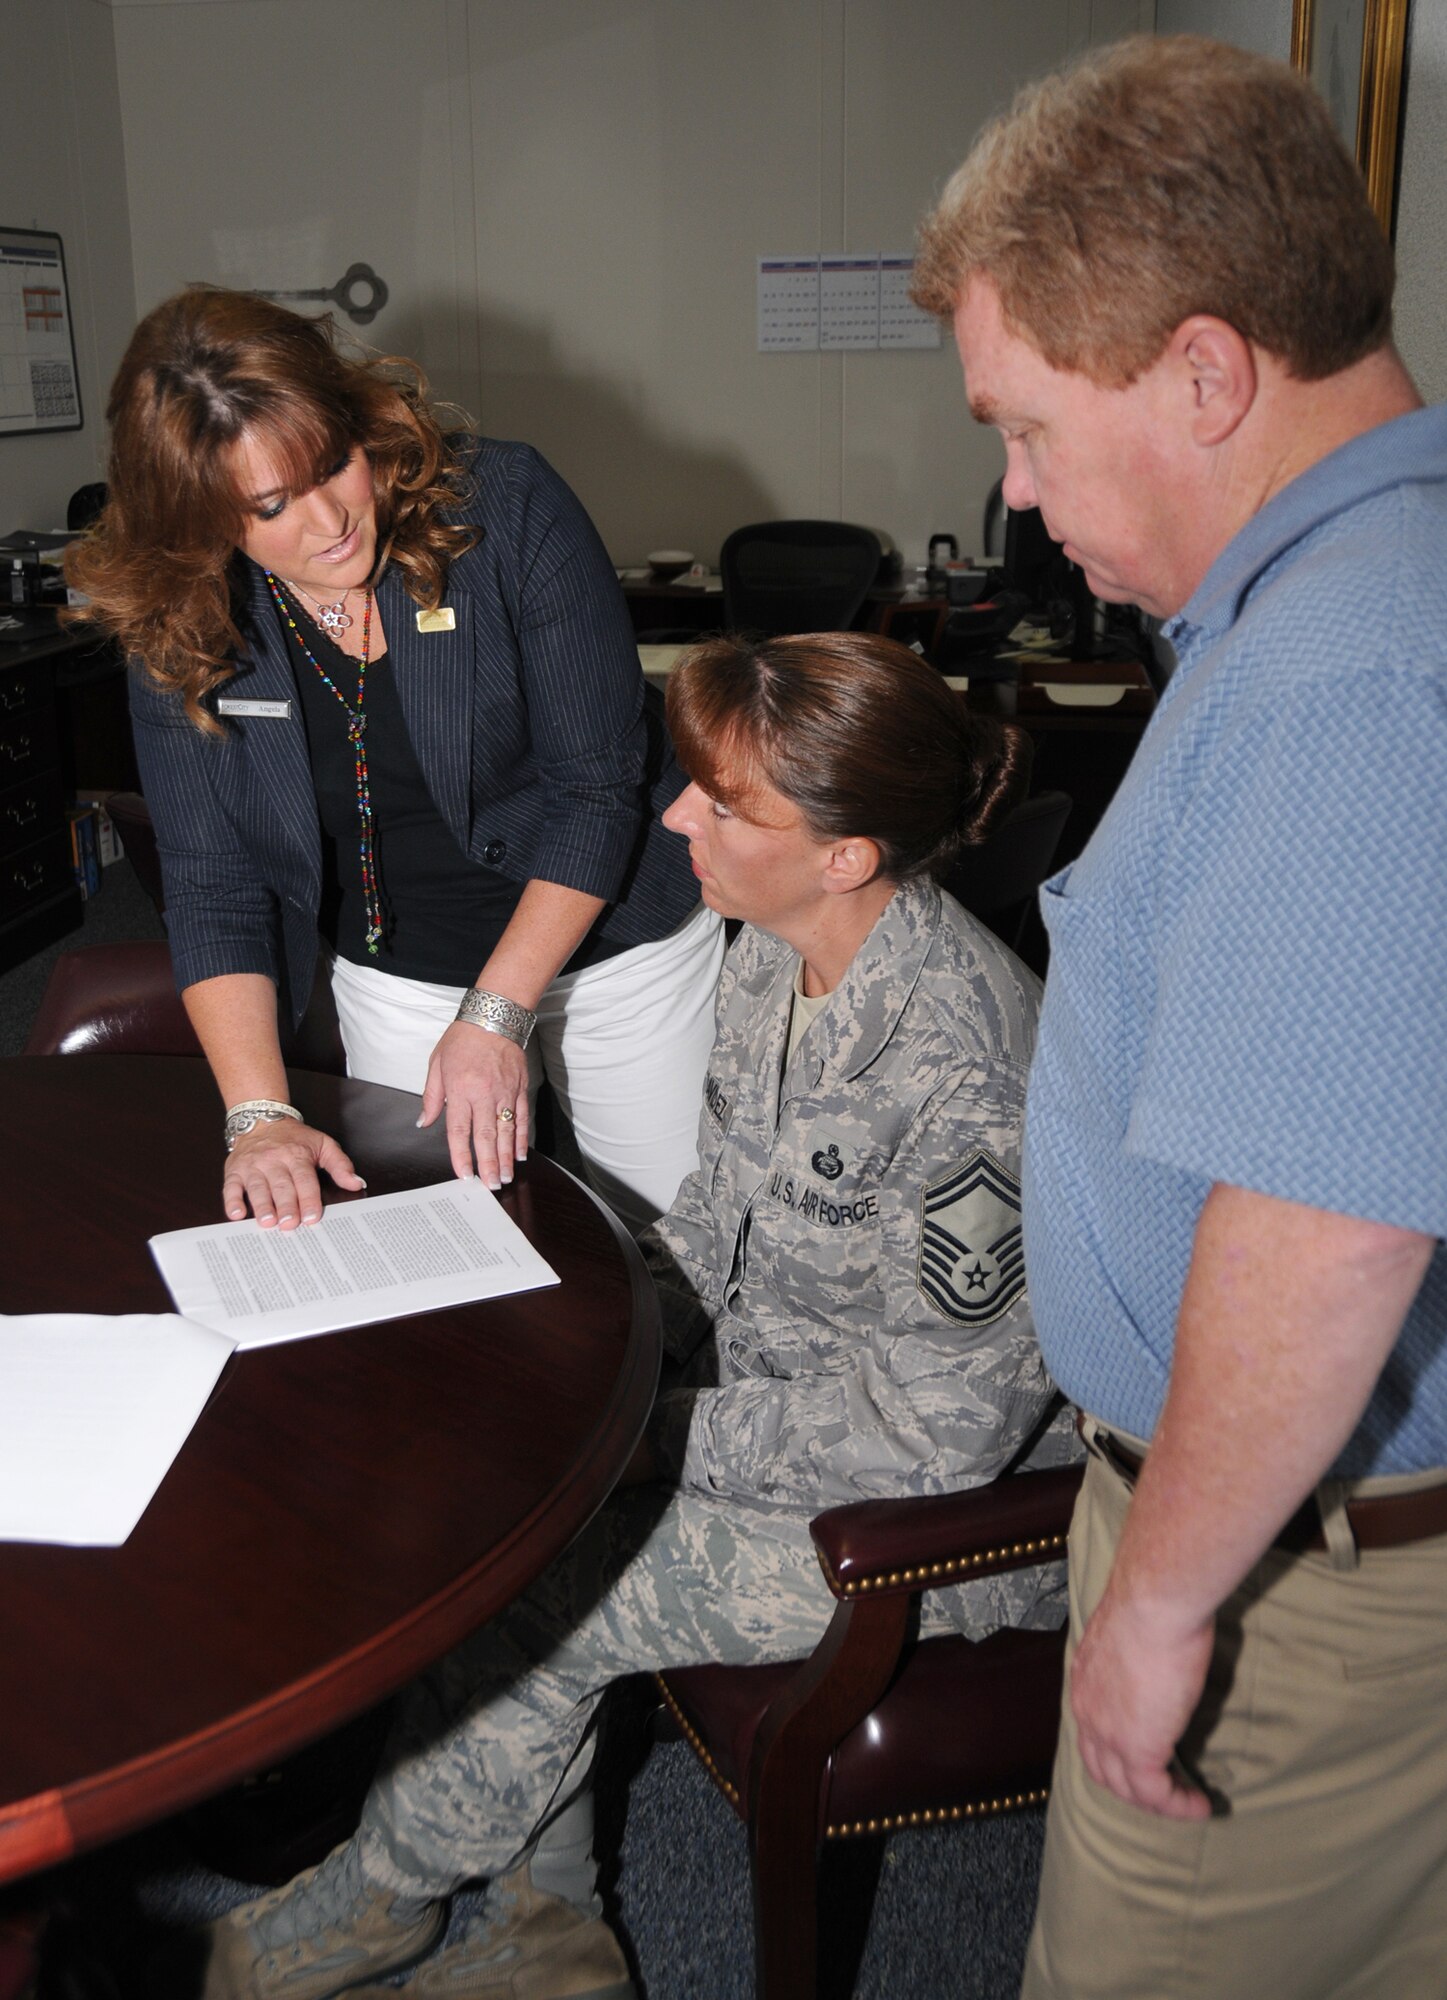 From left, Angela Wood, Forest City resident services management, explains the lease agreement to Senior Master Sgt. Julia Benavidez, 81st Force Support Squadron, as Brett Long, Keesler’s housing flight chief, looks on. Benavidez’s husband, Senior Master Sgt. Juan Benavidez, 81st Logistics Readiness Squadron, is currently deployed to Kyrgyzstan.  A lease-signing event is 7:30 a.m. to 8 p.m. at the Bay Breeze Event Center.  (U.S. Air Force photo by Kemberly Groue)